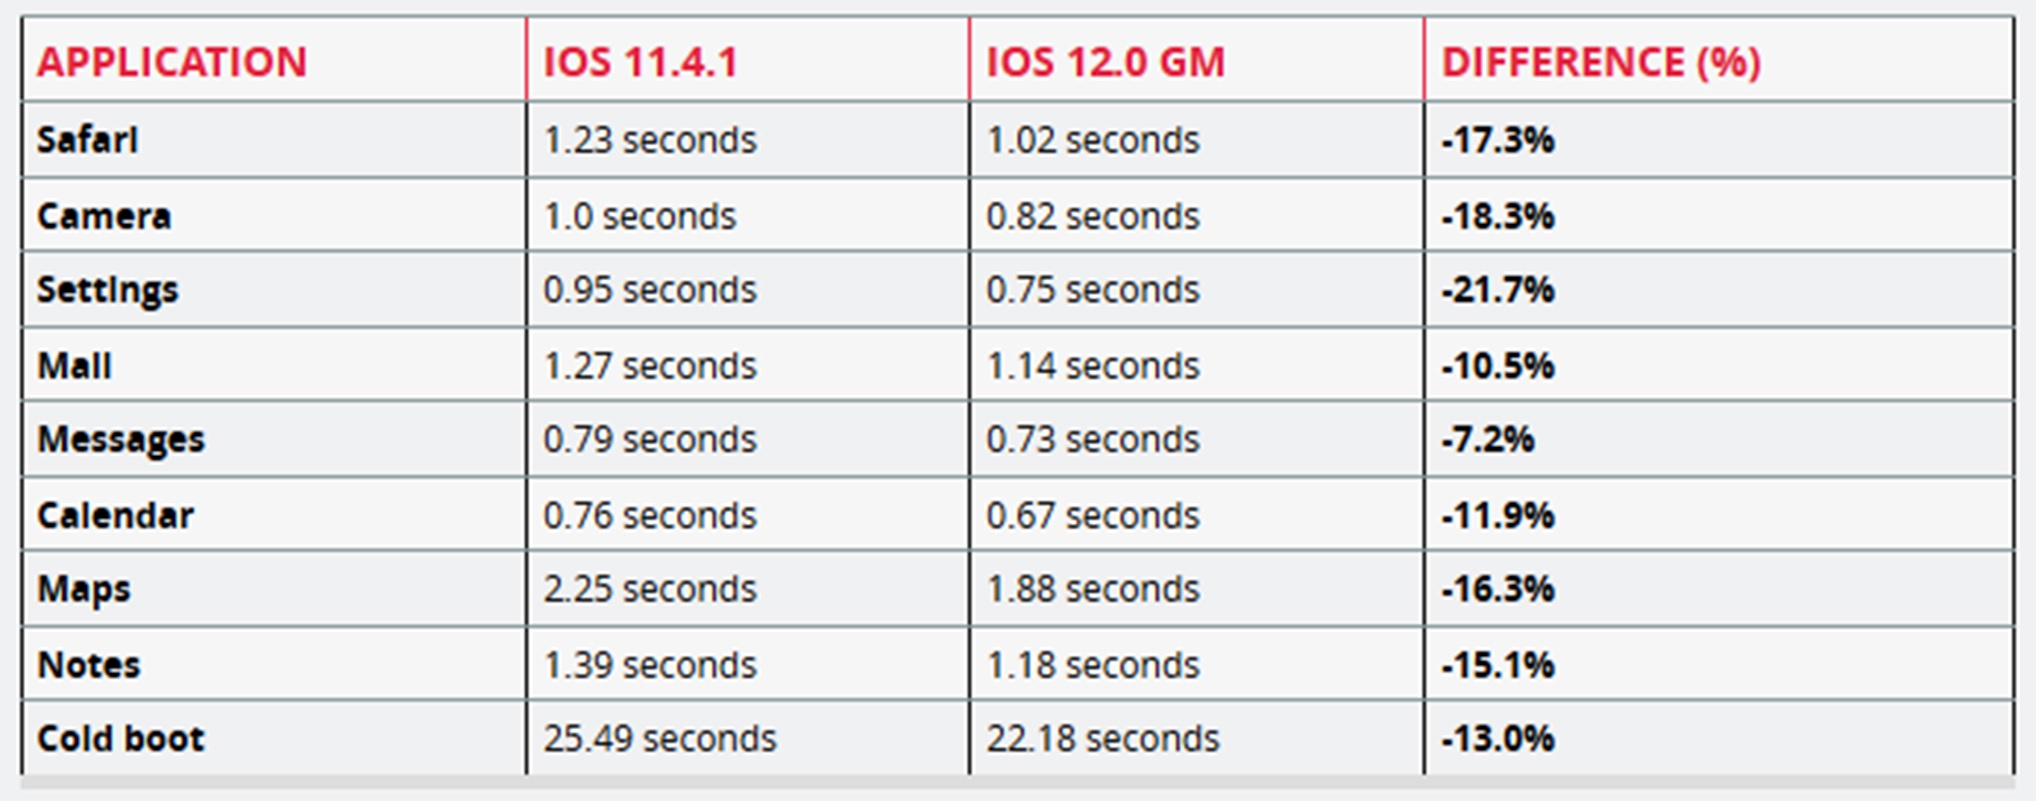 iPhone 6 Plus test results